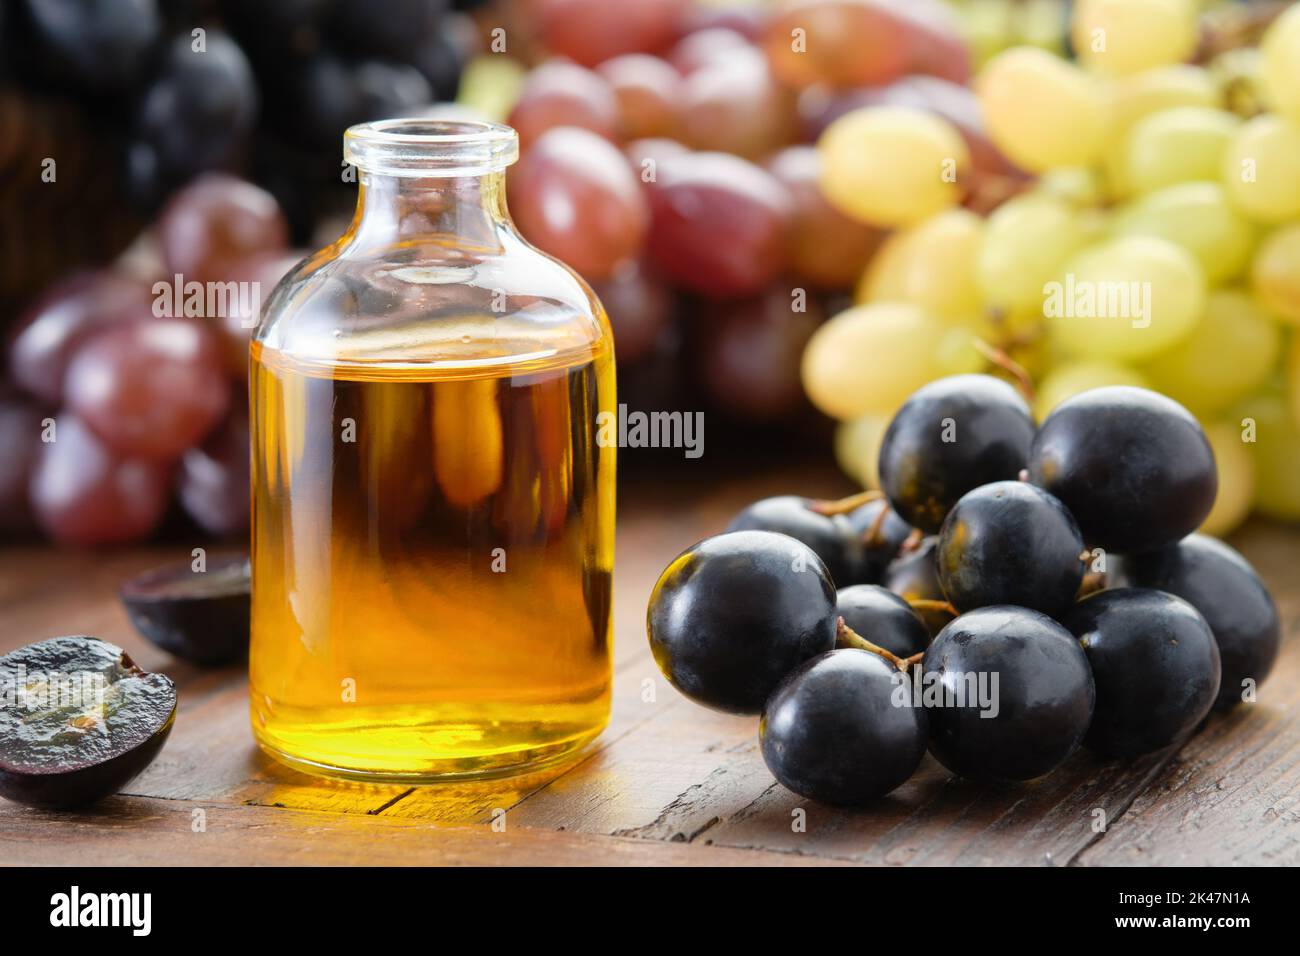 Organic grape seeds essential oil bottle. Black, green and purple grapes on table. Stock Photo